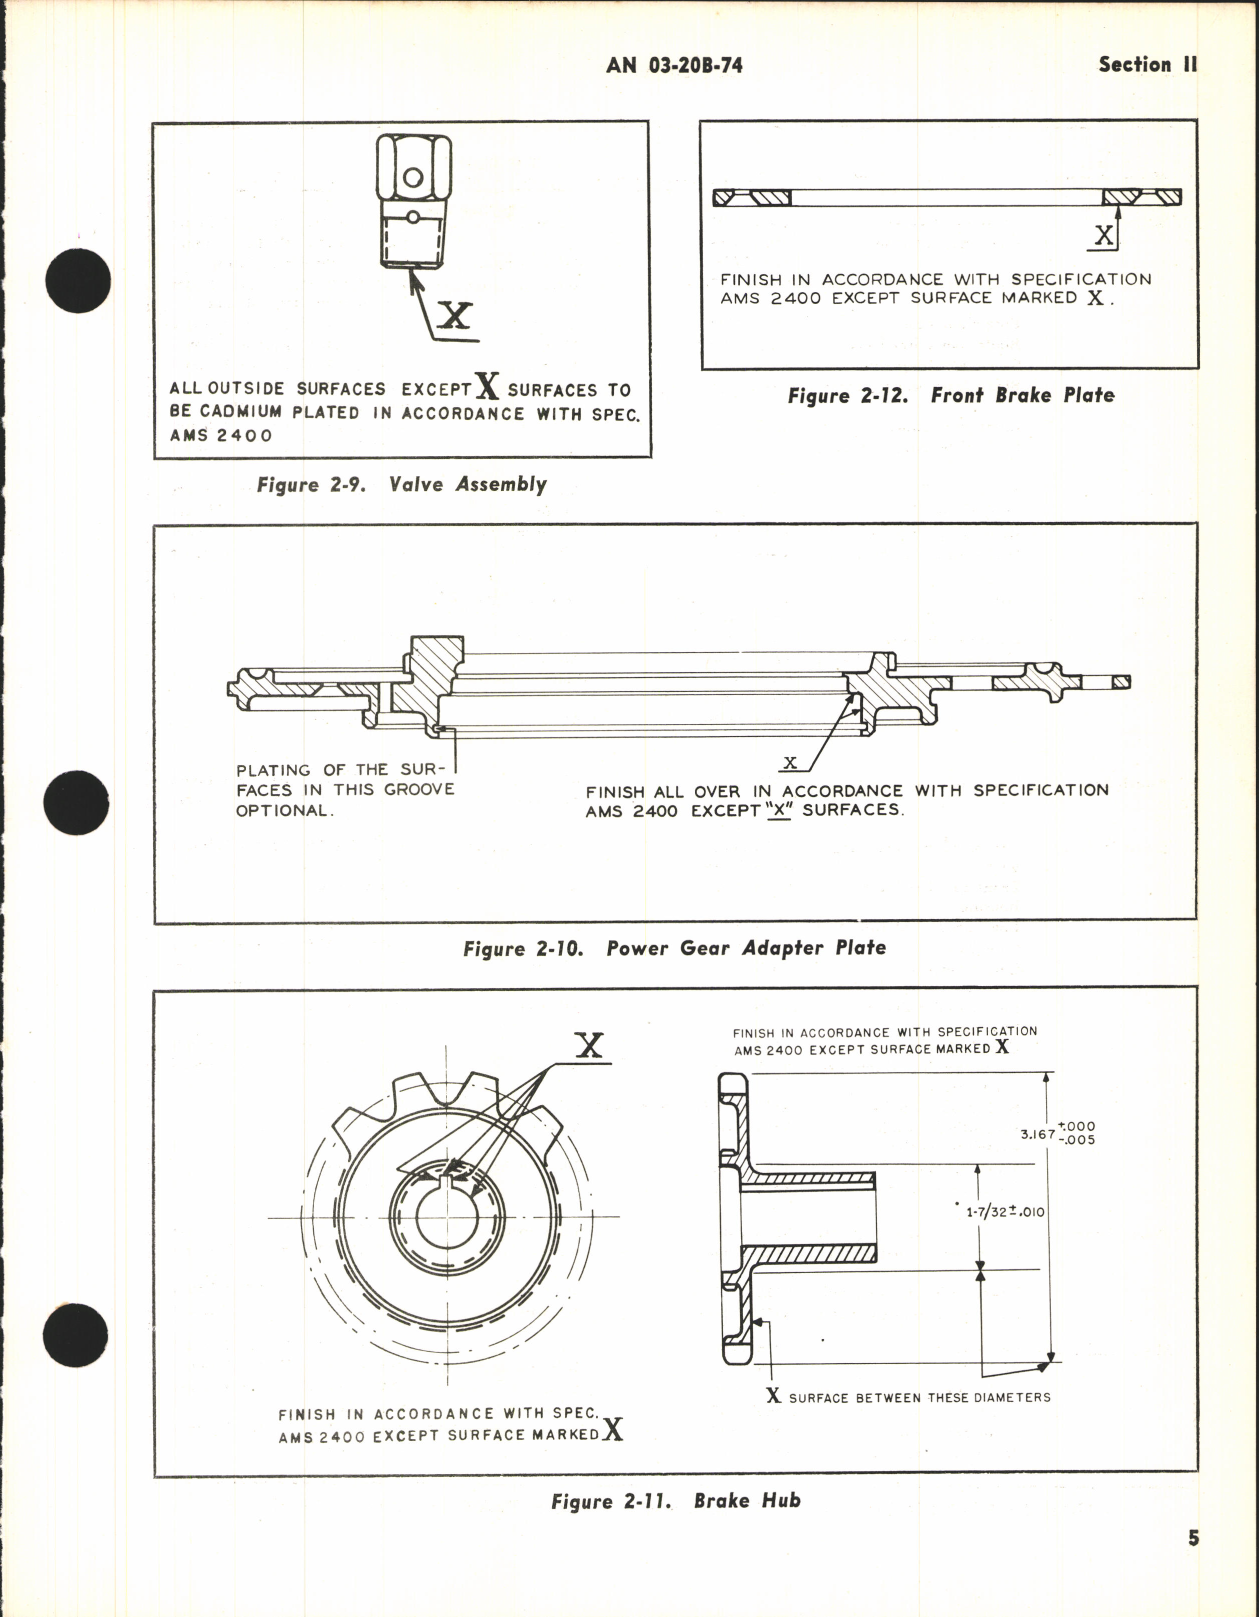 Sample page 7 from AirCorps Library document: Overhaul Instructions Plating and Anodizing Instructions for Electric Propellers